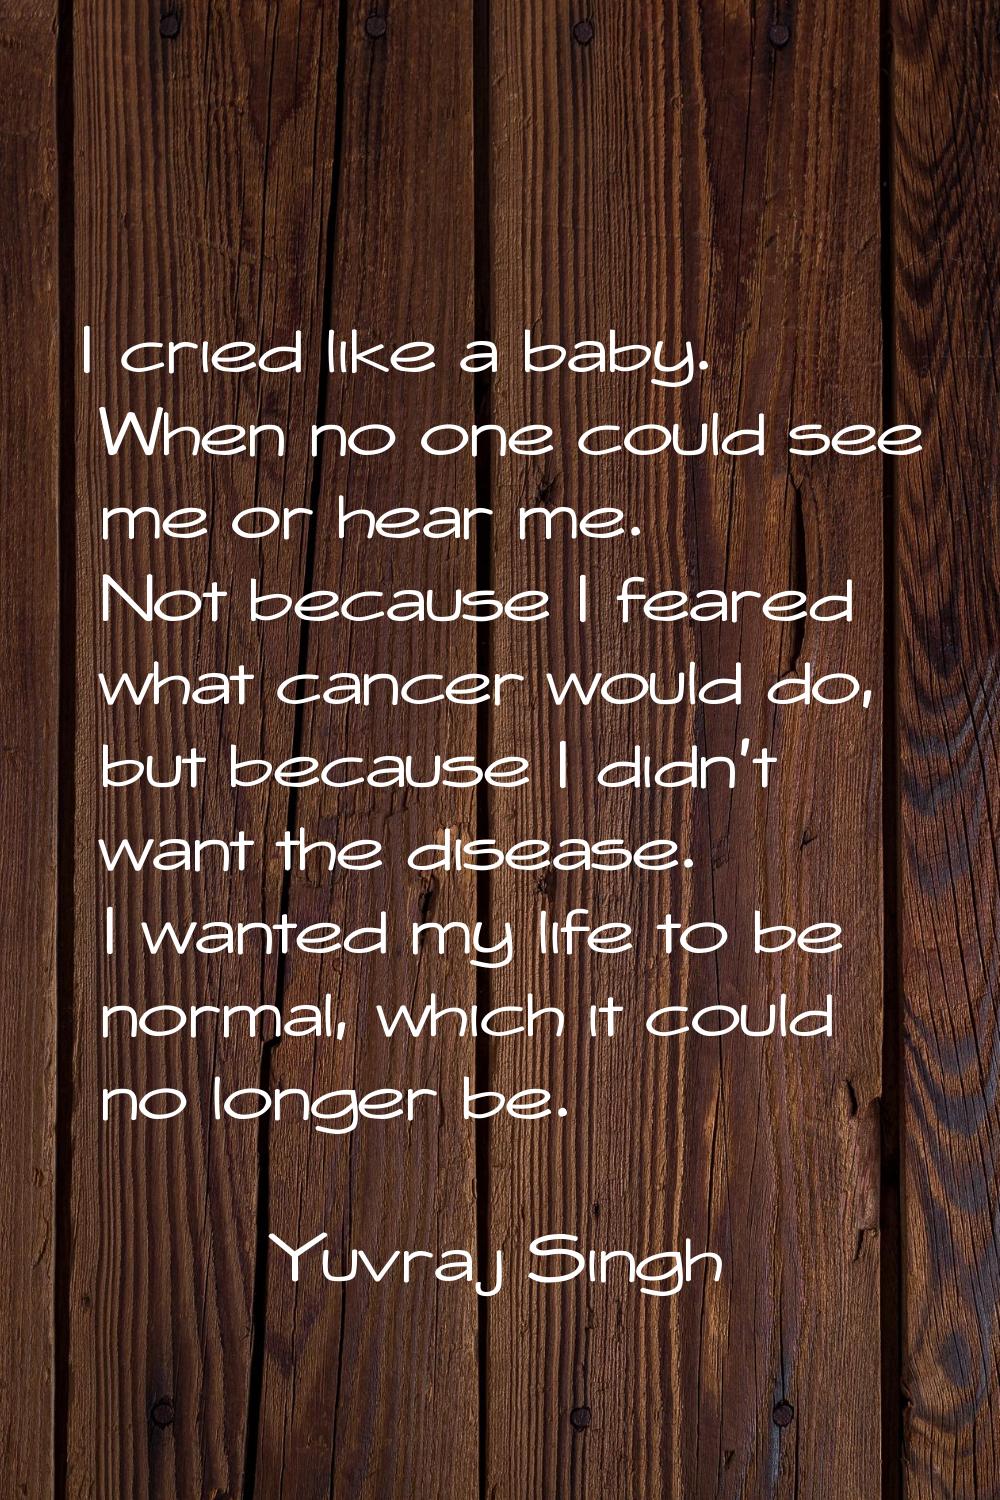 I cried like a baby. When no one could see me or hear me. Not because I feared what cancer would do